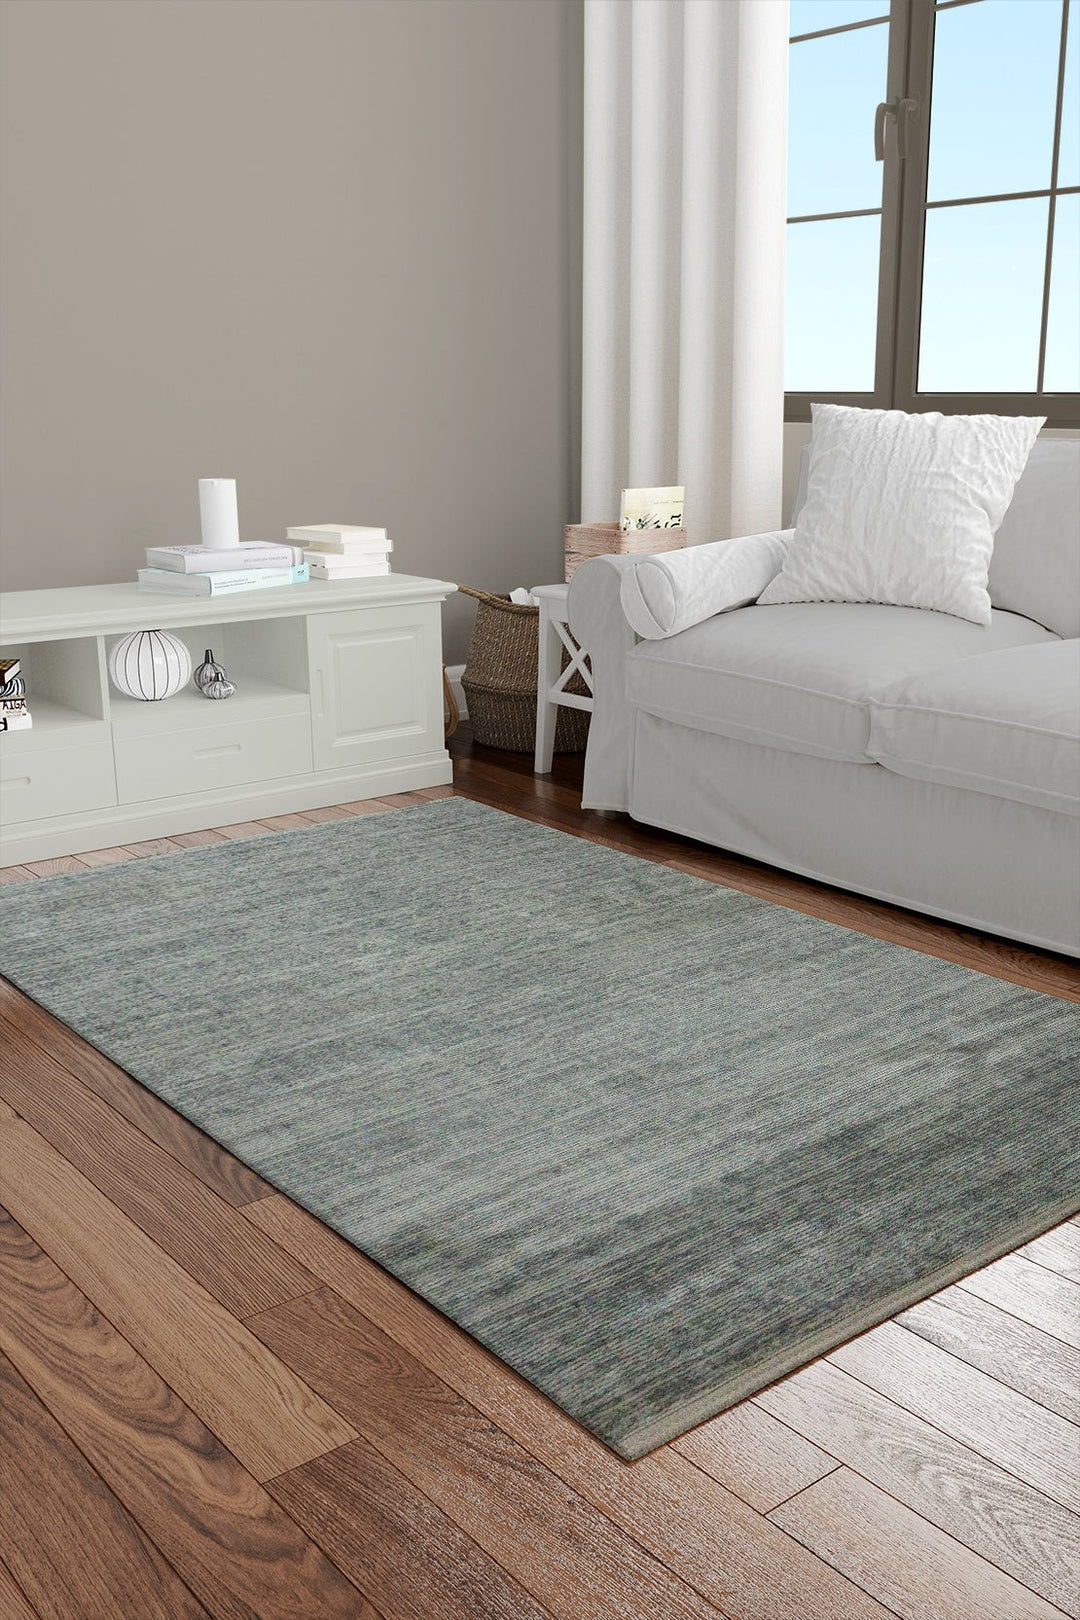 Turkish Modern Festival Viscos Rug - 2.6 x 3.9 FT - Gray - Sleek and Minimalist for Chic Interiors - V Surfaces